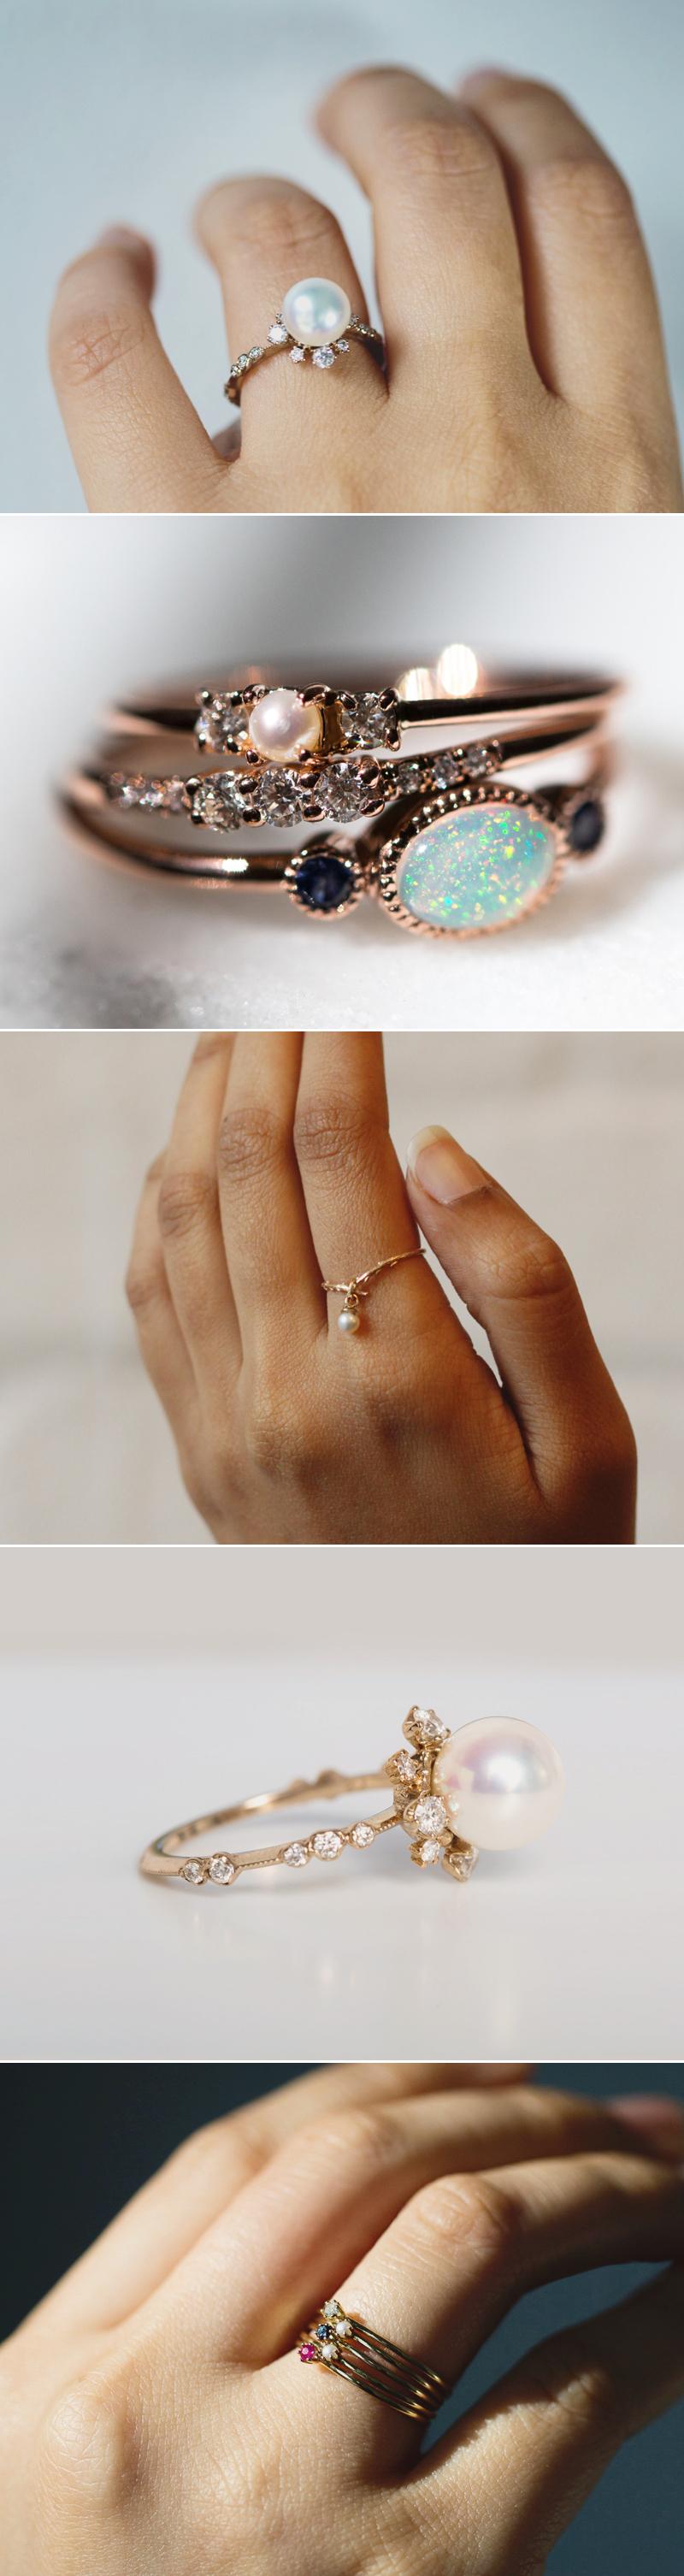 pearl-engagement-ring02-Catbird